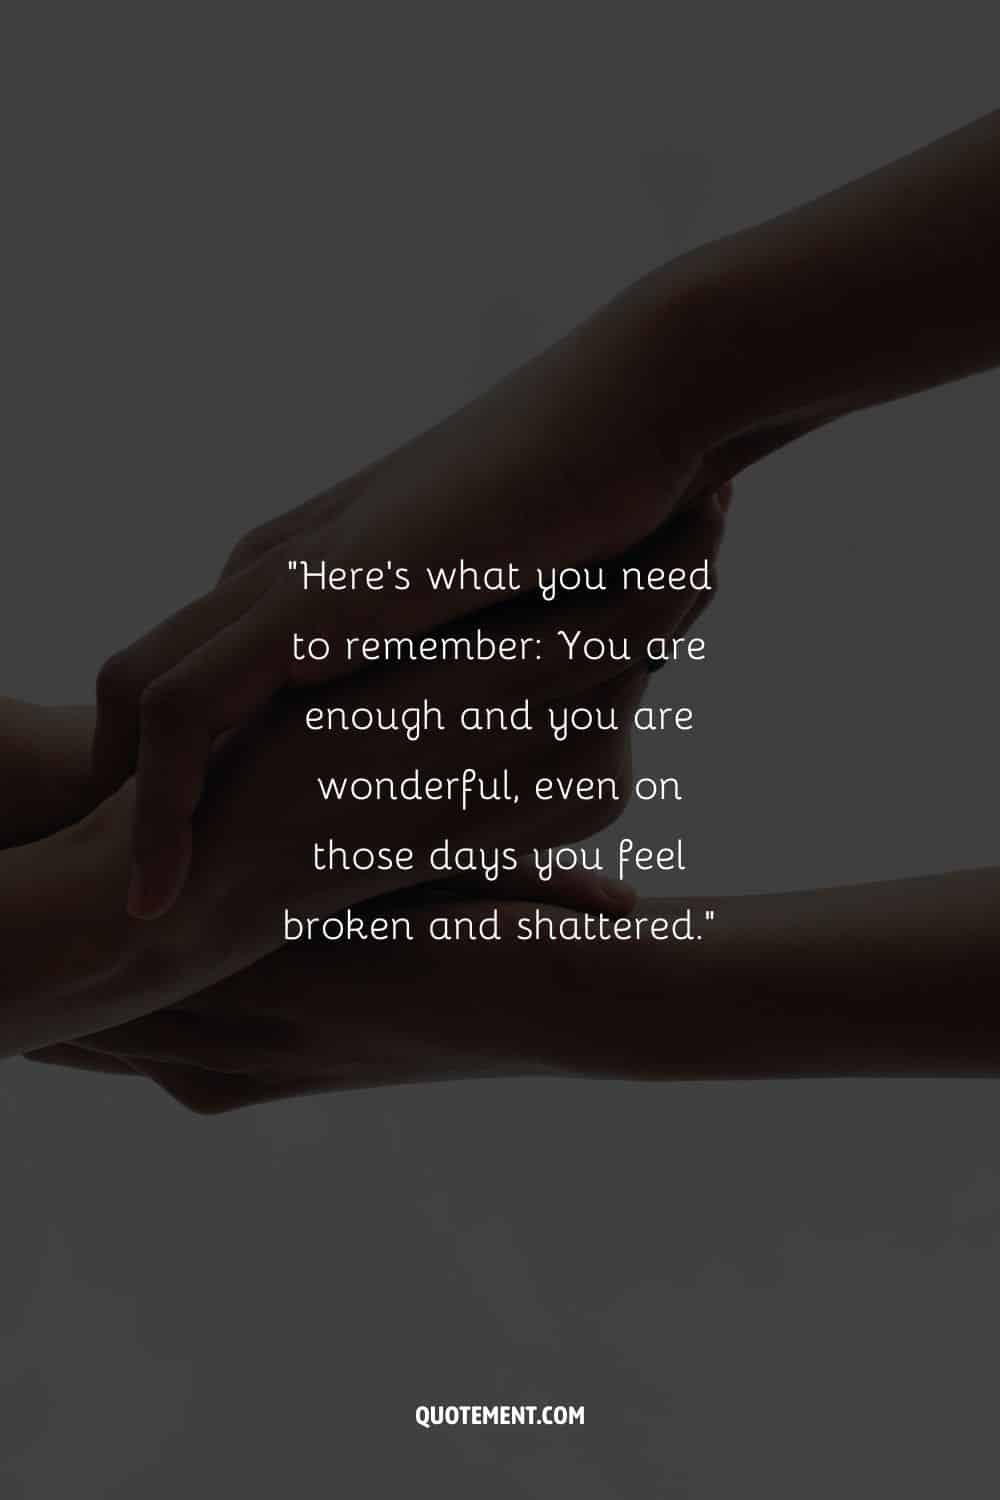 holding hands image representing encouraging words to comfort a suffering friend